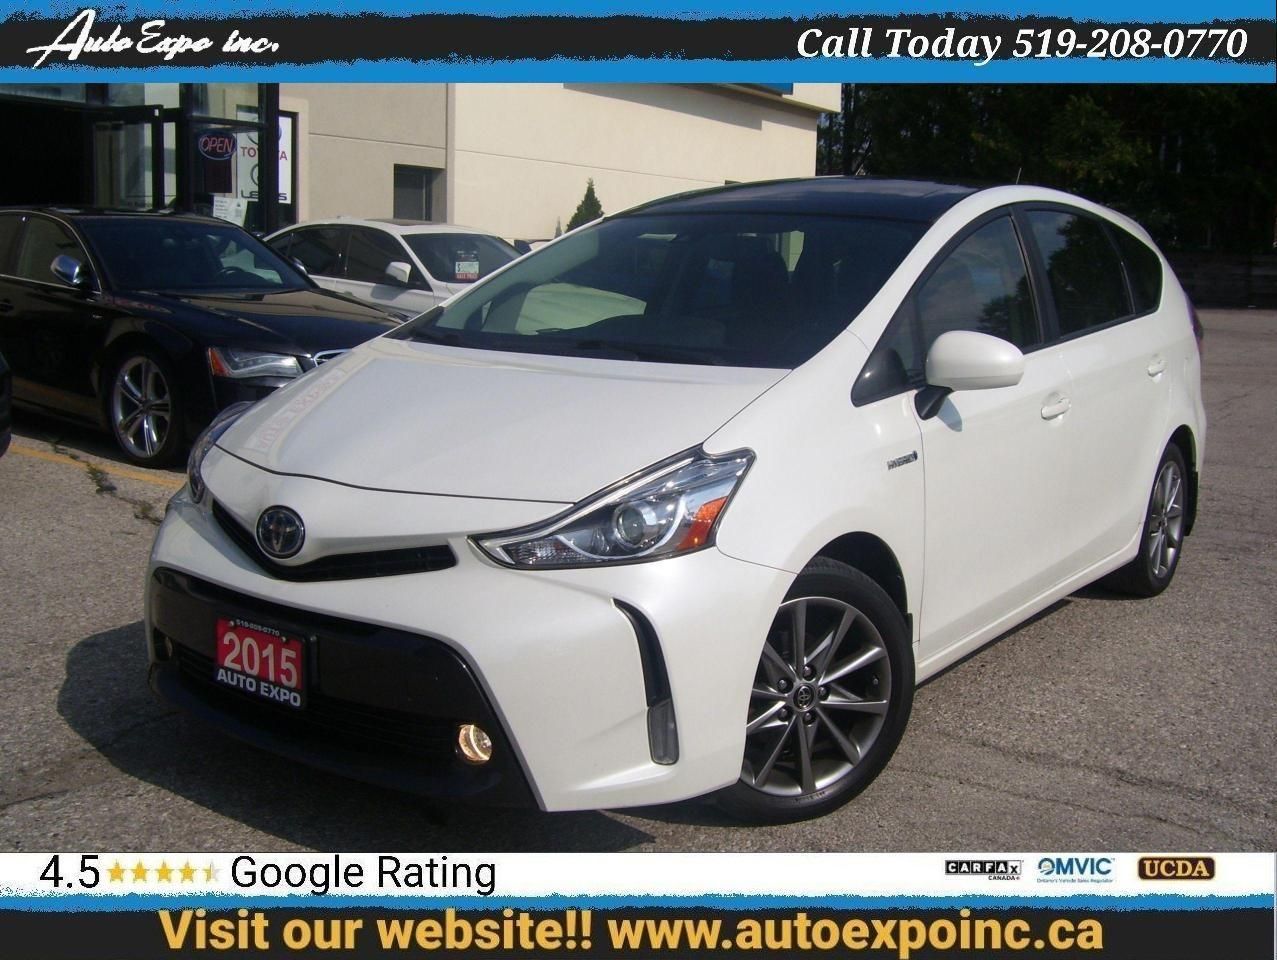 2015 Toyota Prius v Auto,Sunroof,Lather,GPS,Certified,Bluetooth,,,